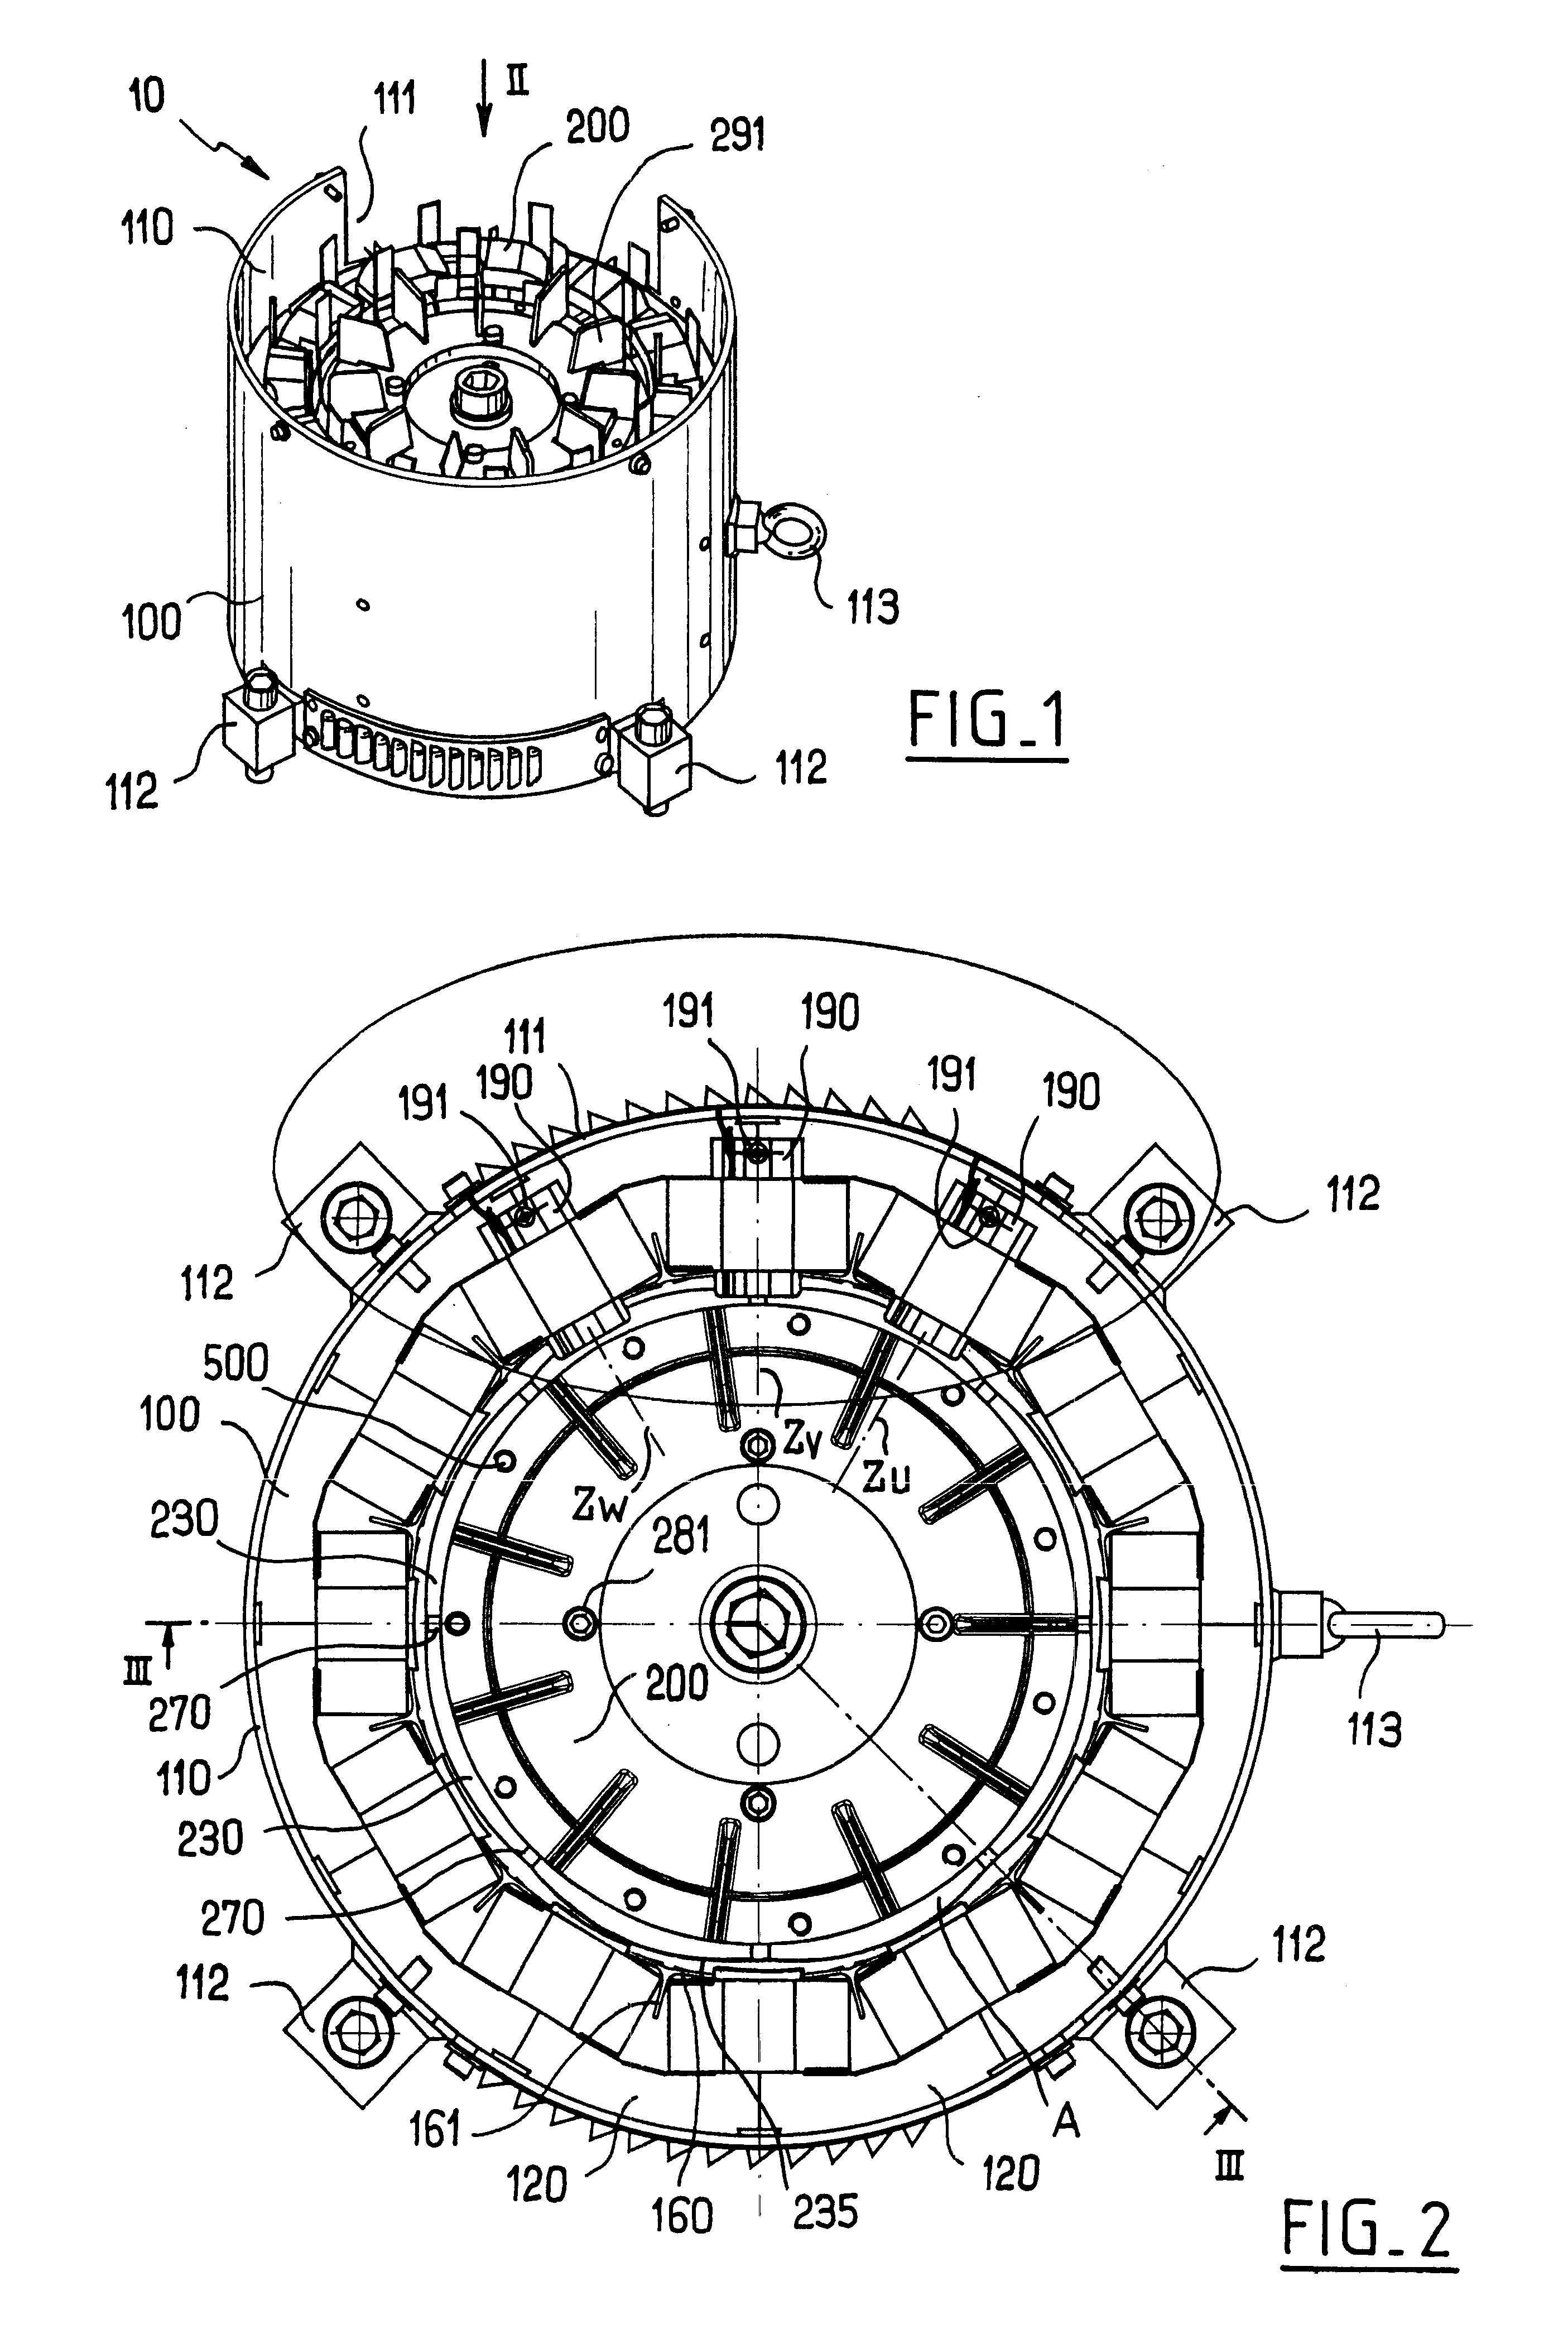 Rotary electric machine stator having individual removable coils